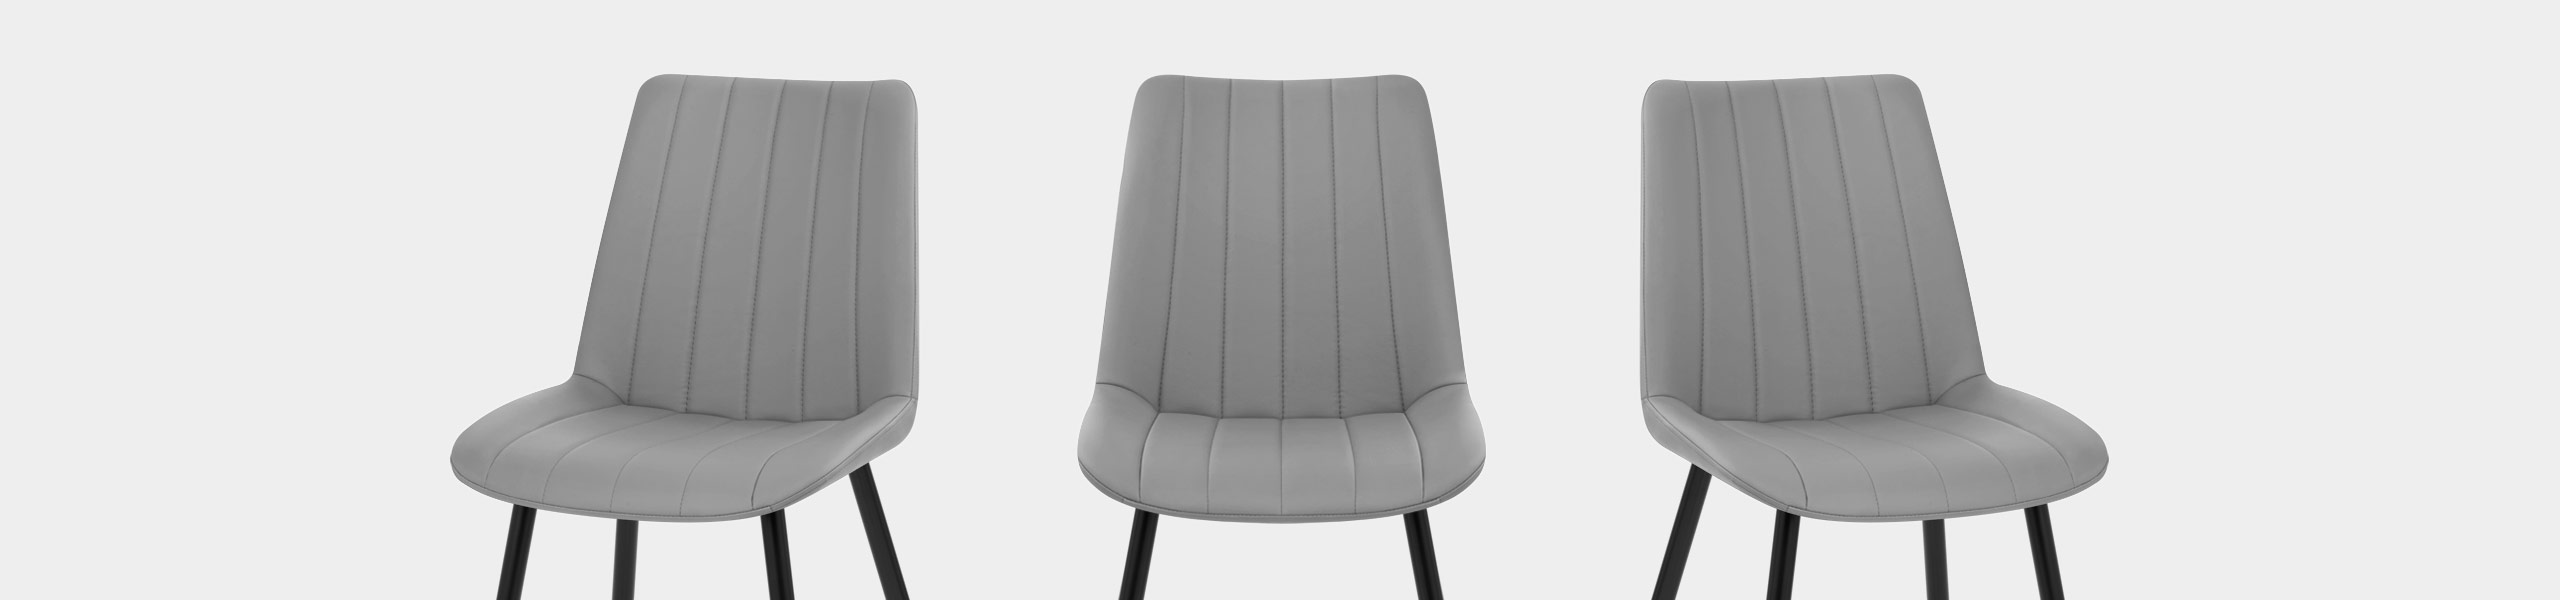 Camino Dining Chair Mid Grey Video Banner